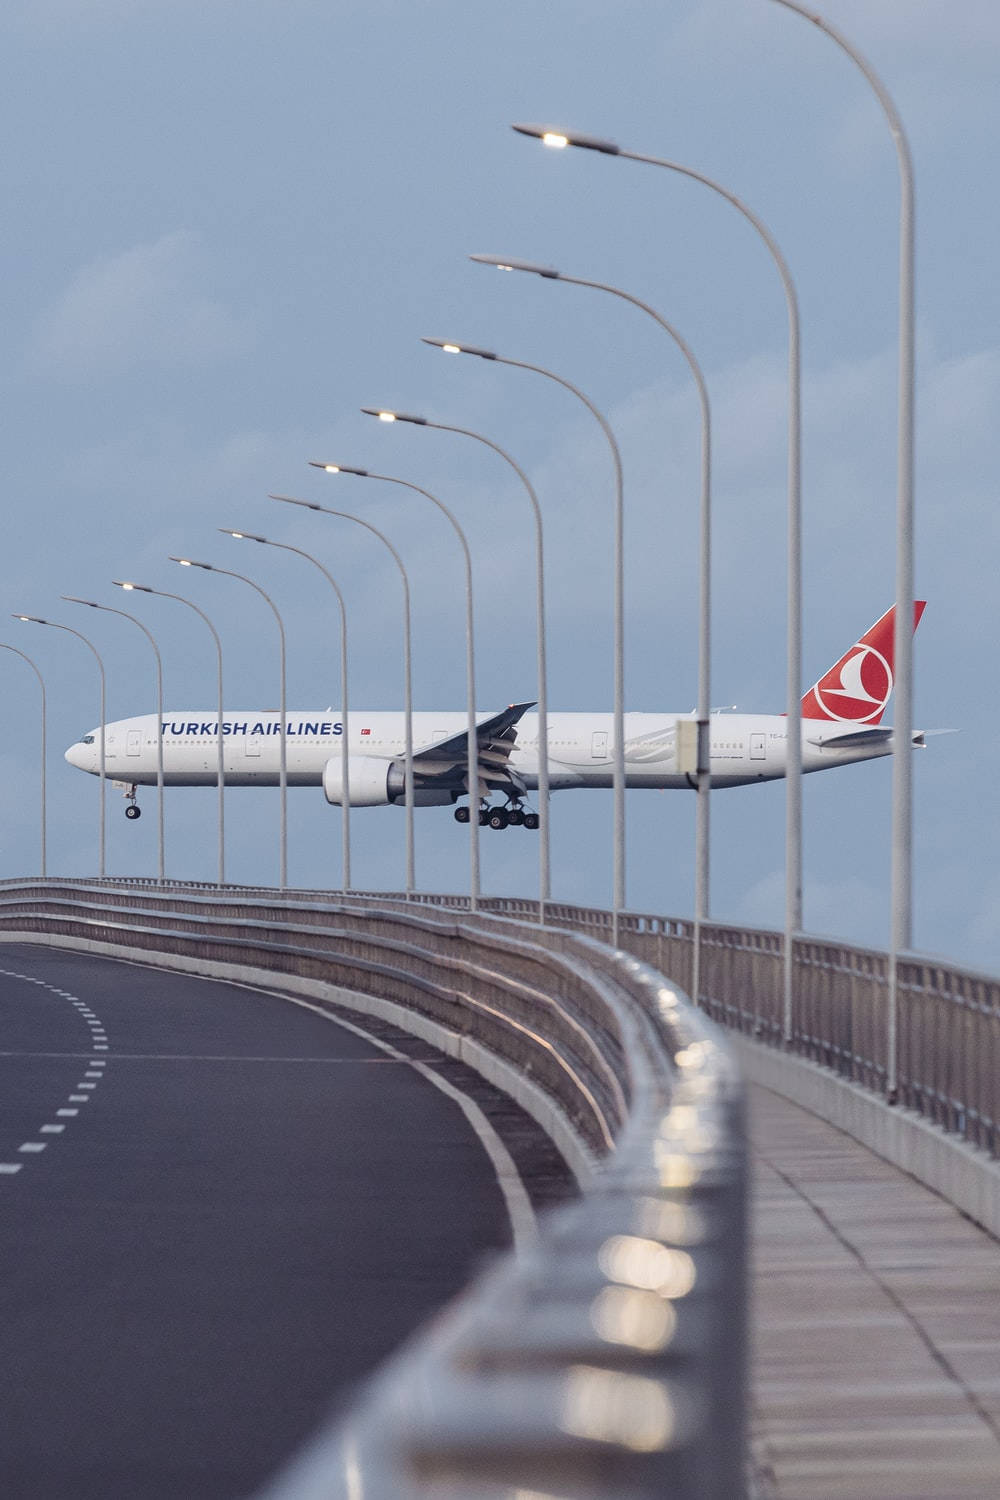 Turkishairlines Airbus A319-132/100 Wallpaper